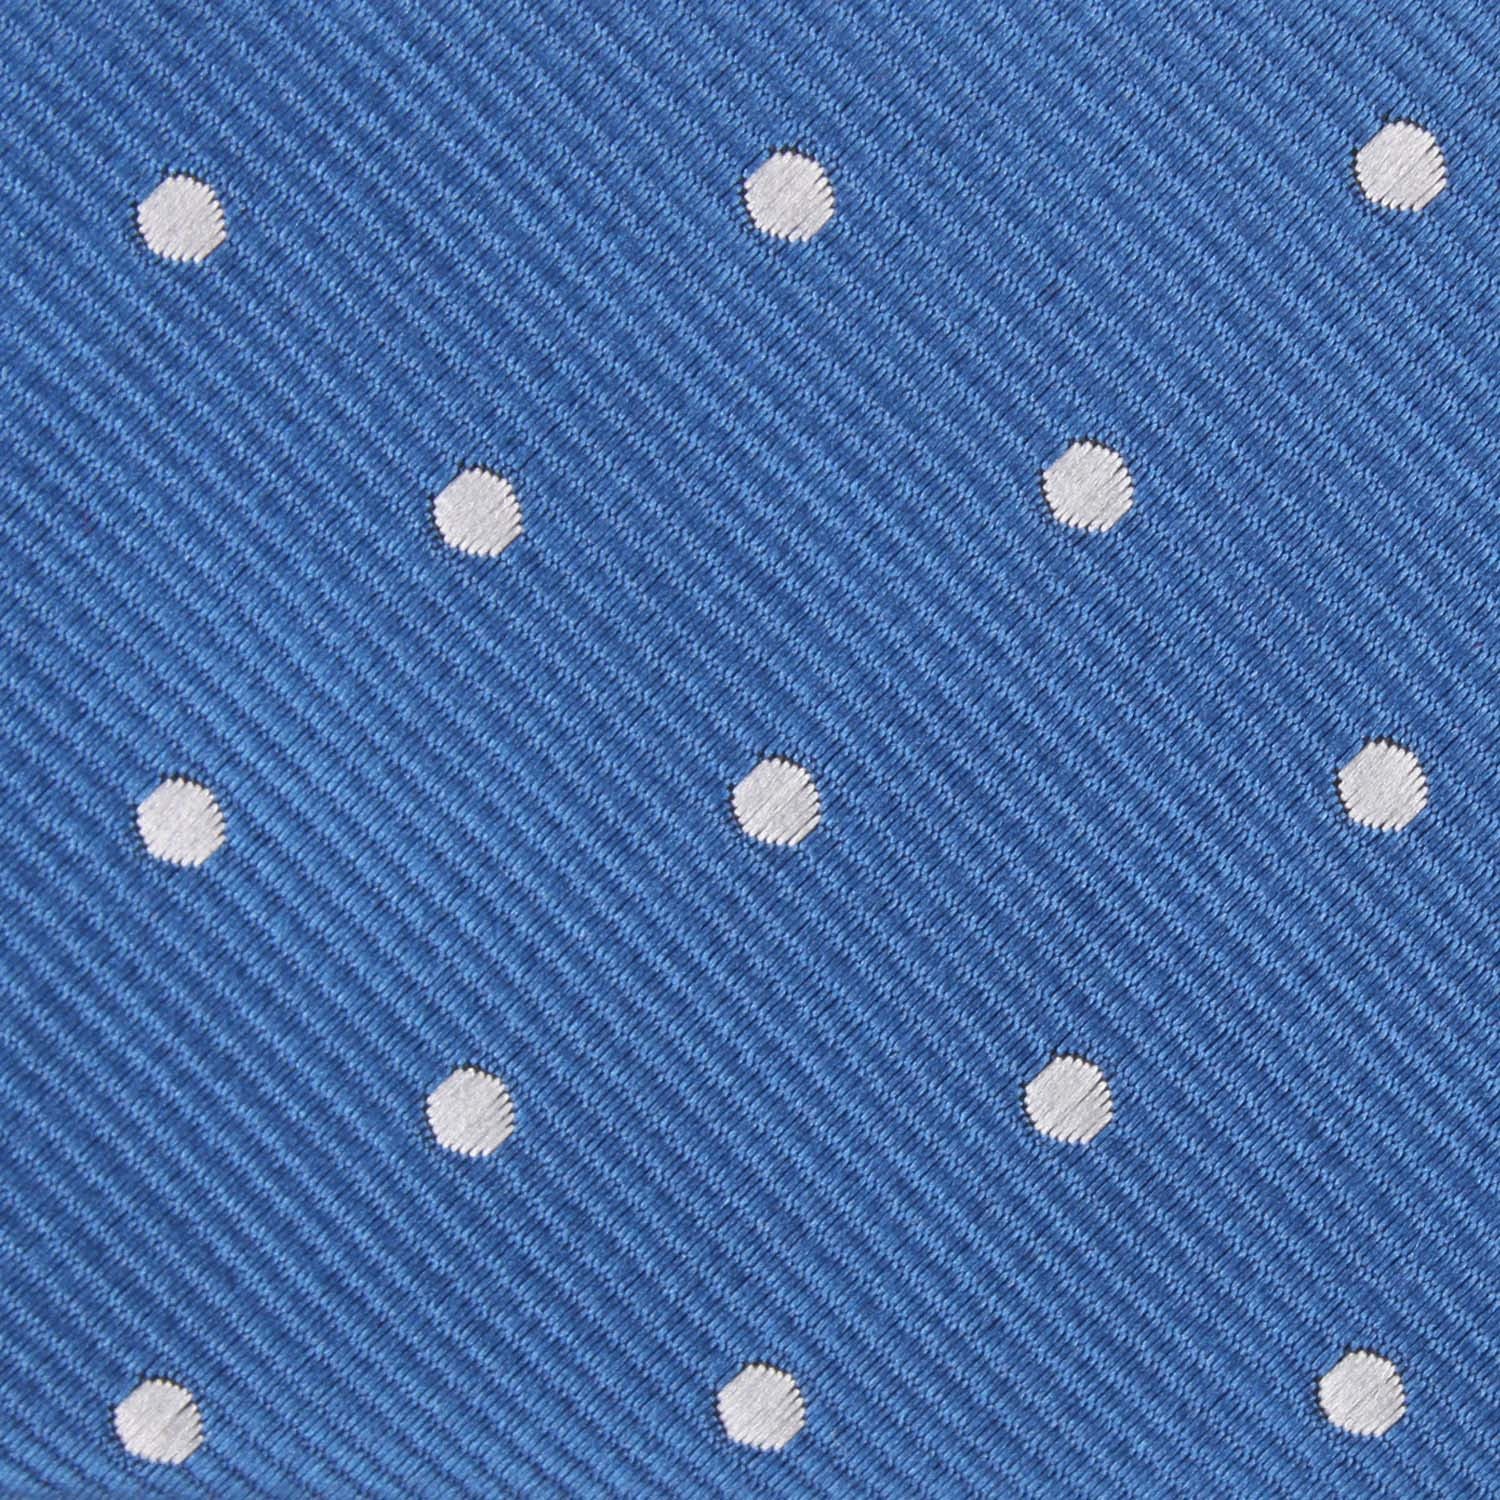 Royal Blue with White Polka Dots Fabric Bow Tie M125